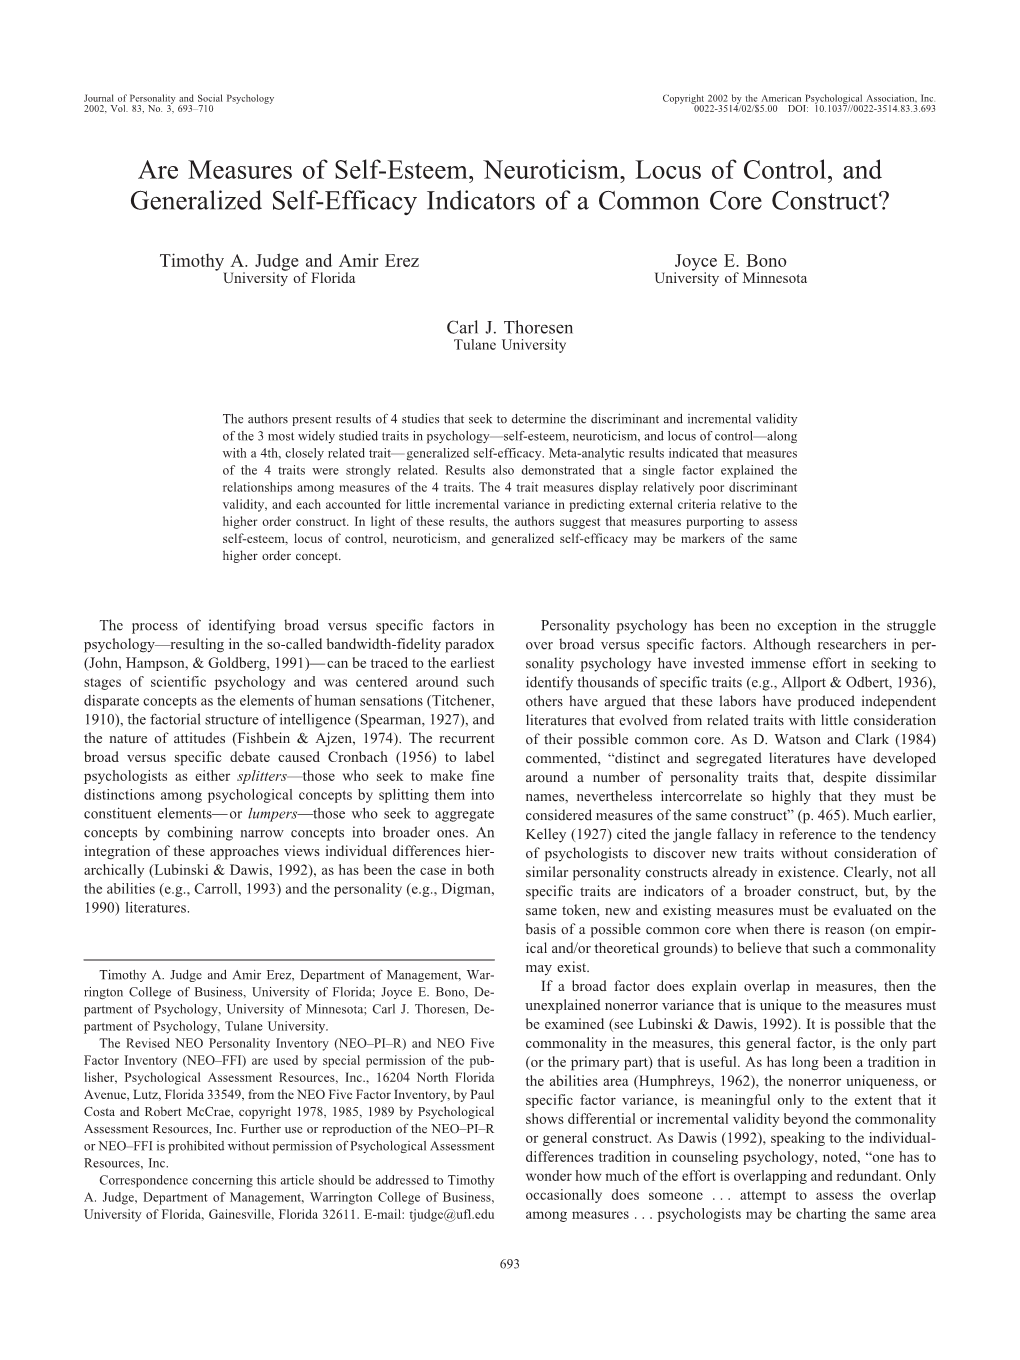 Are Measures of Self-Esteem, Neuroticism, Locus of Control, and Generalized Self-Efficacy Indicators of a Common Core Construct?